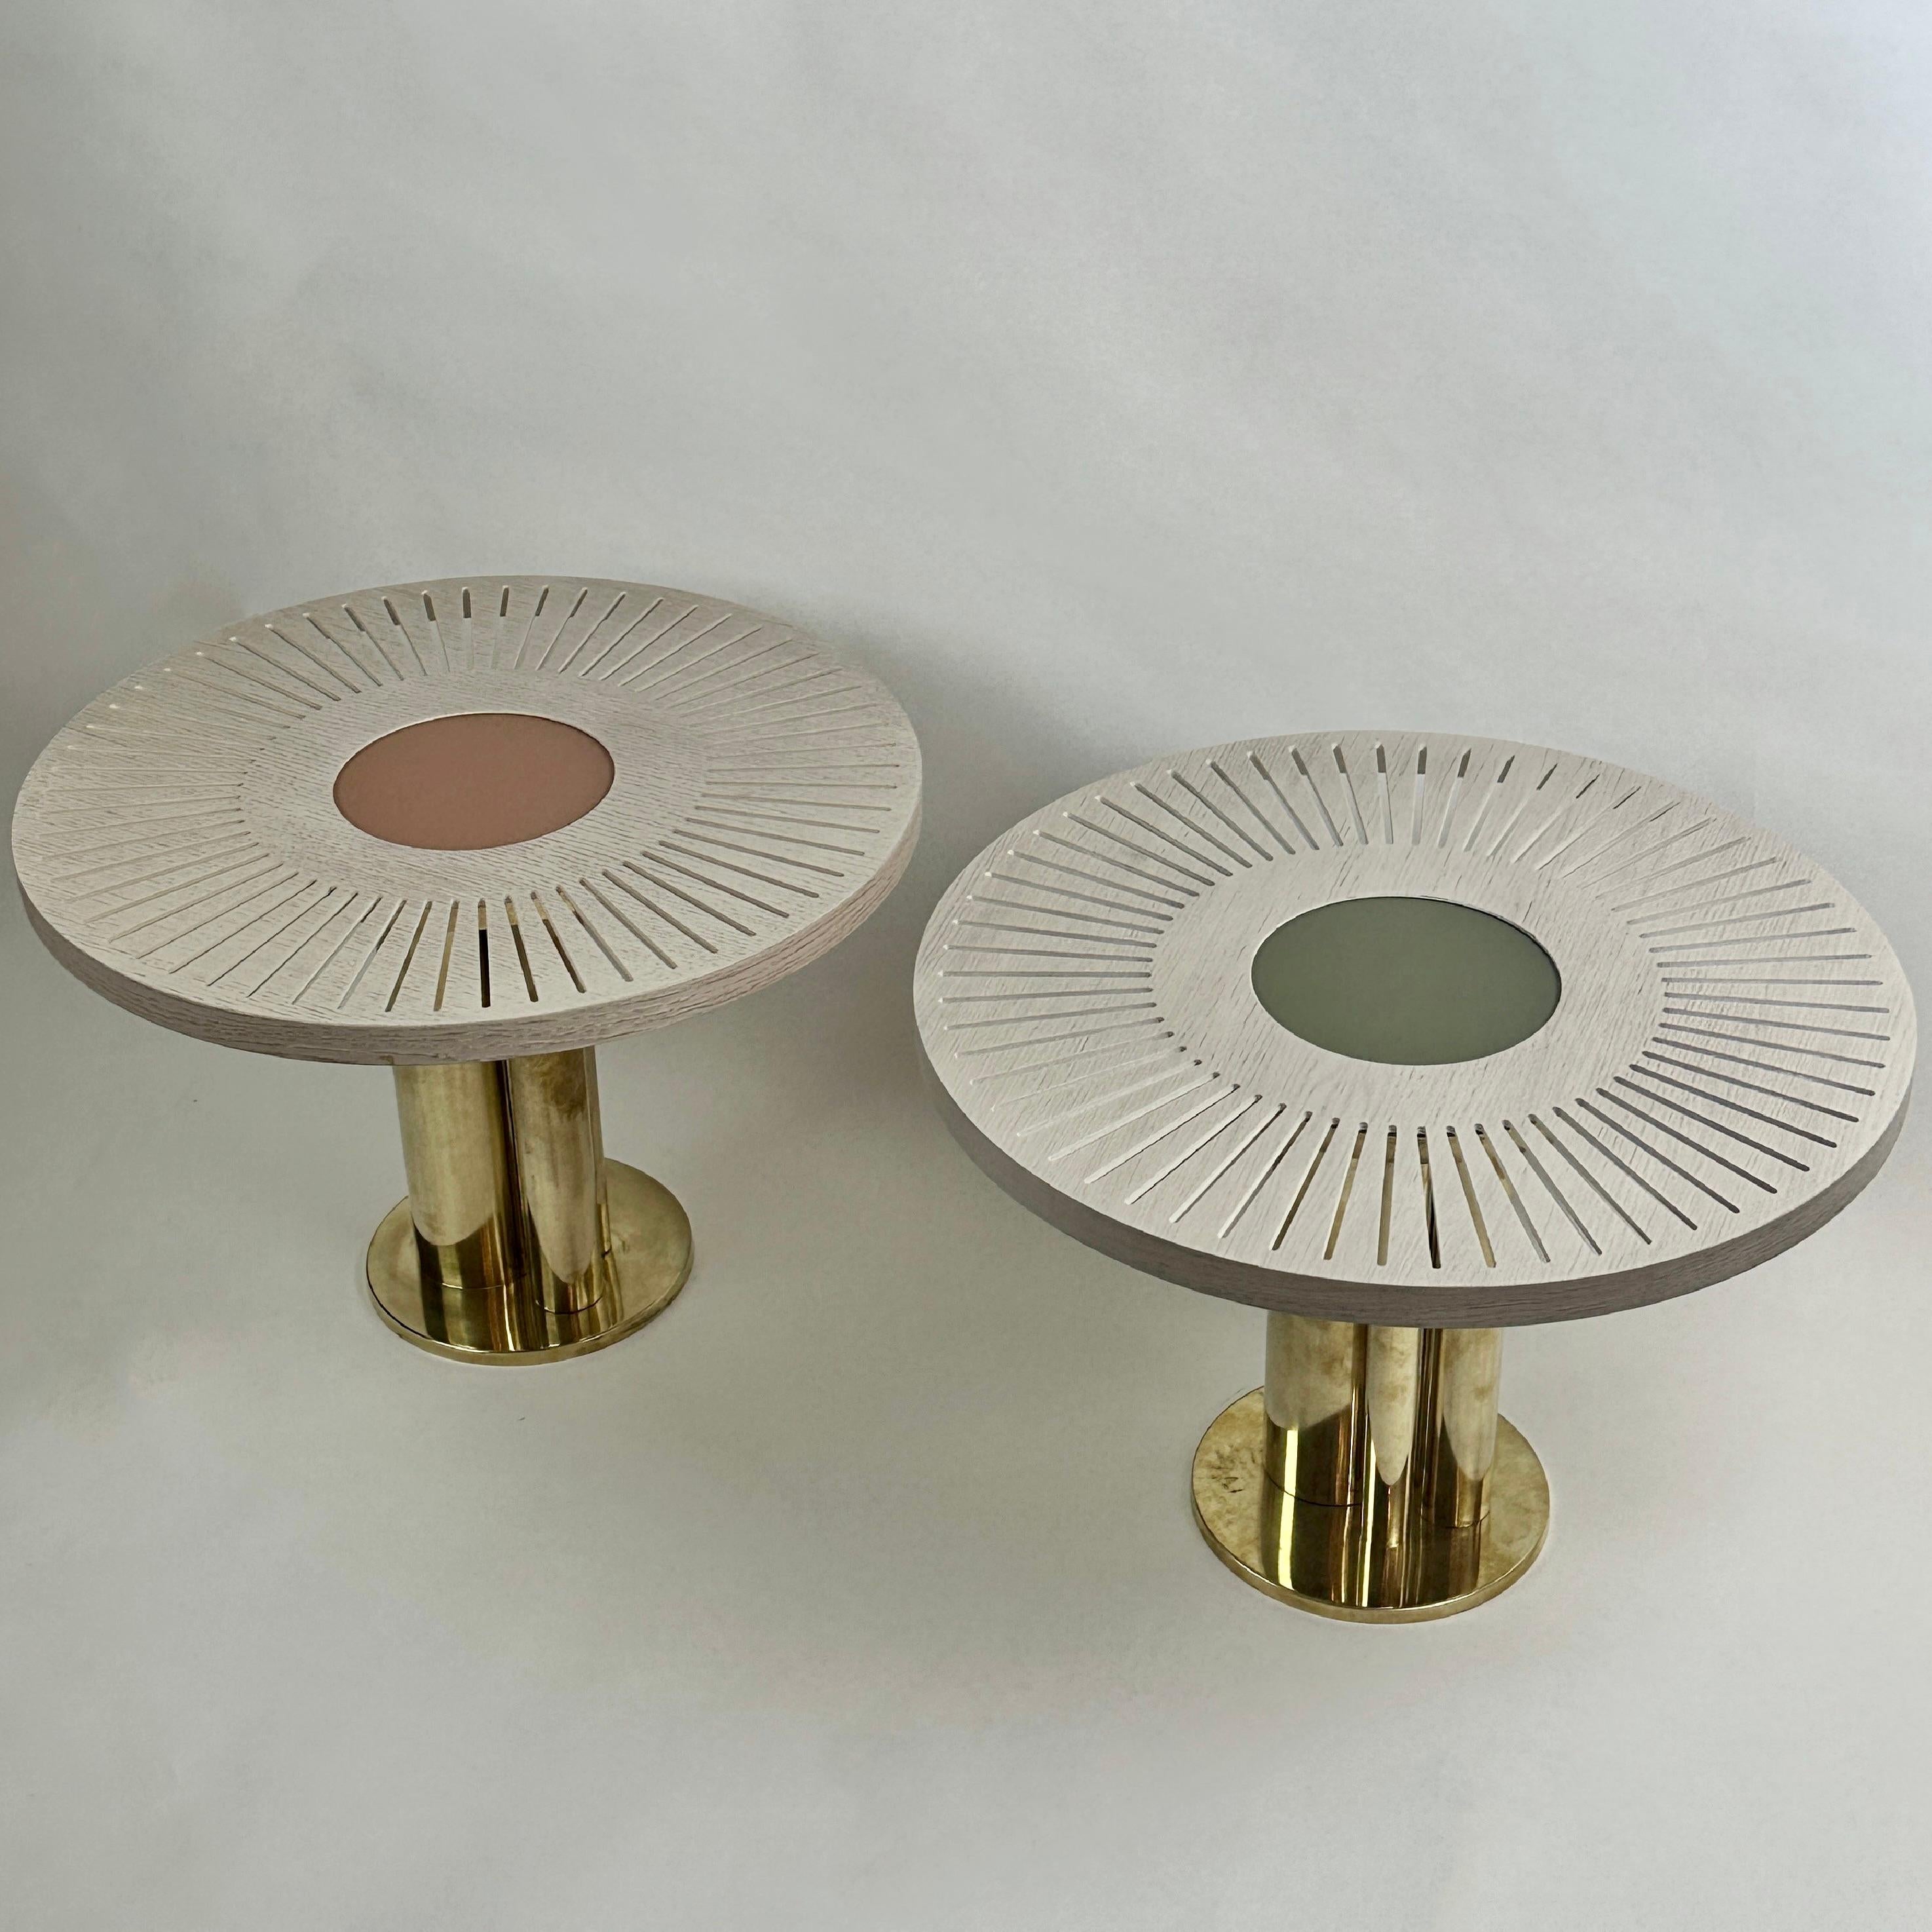 Pair of stunning round side tables with powder pink and olive green opaline glass centers. Brass basement with three brass cylinders each. 
Another pair of round coffee tables with brick red & emerald green opaline glass centers is available, in